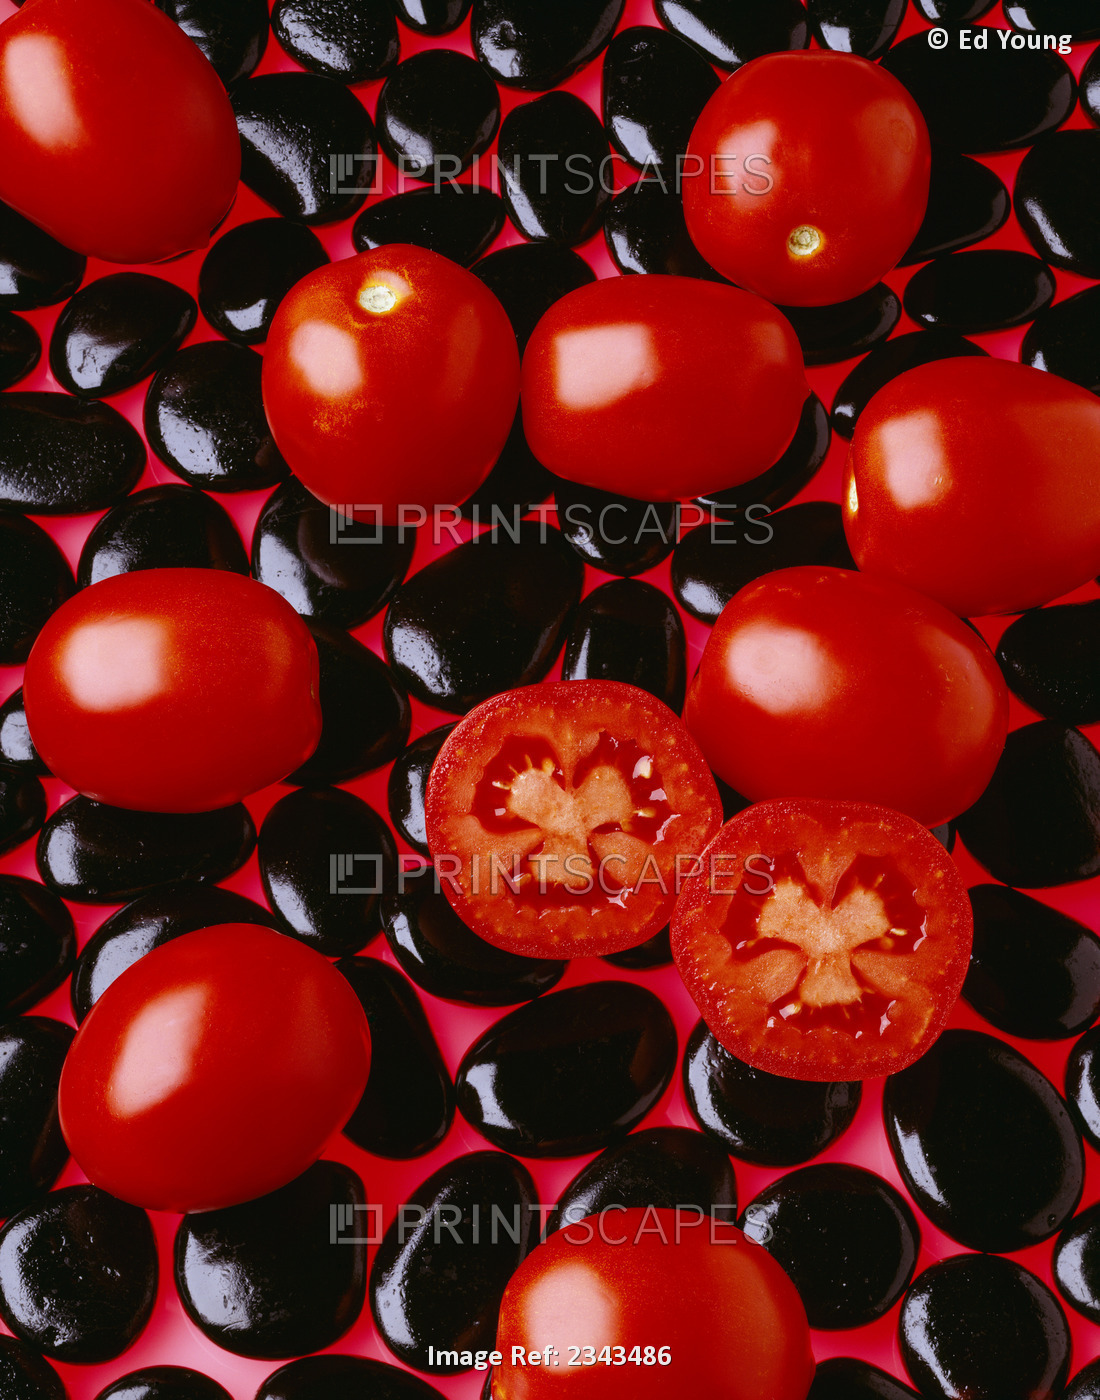 Agriculture - Processing tomatoes on black rocks and red surface, sliced, ...